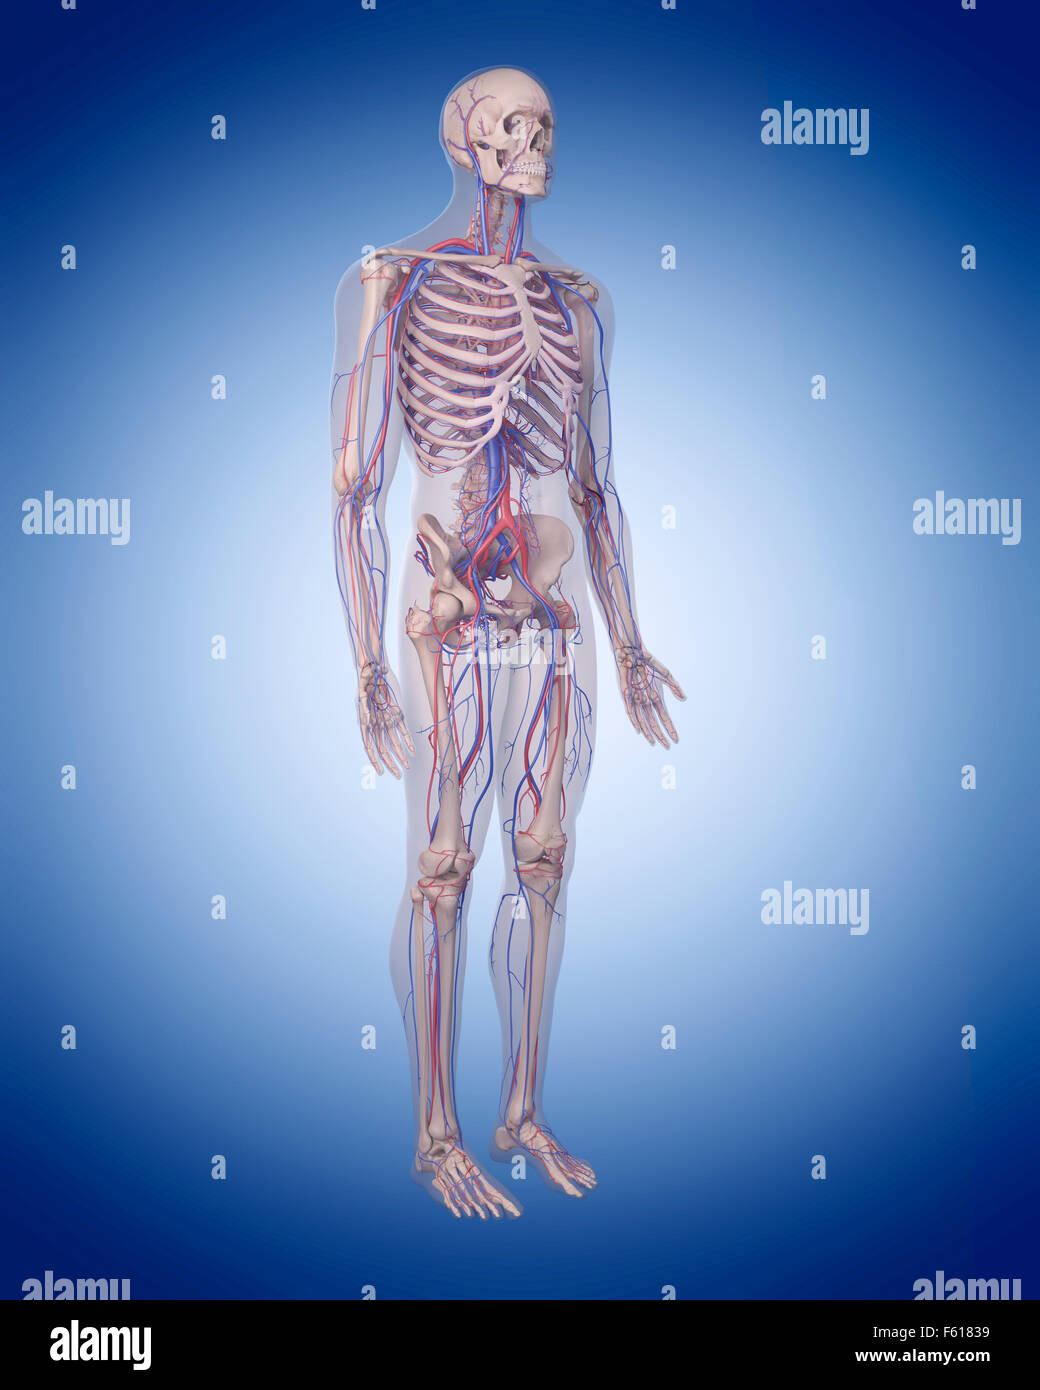 Circulatory System High Resolution Stock Photography and Images - Alamy